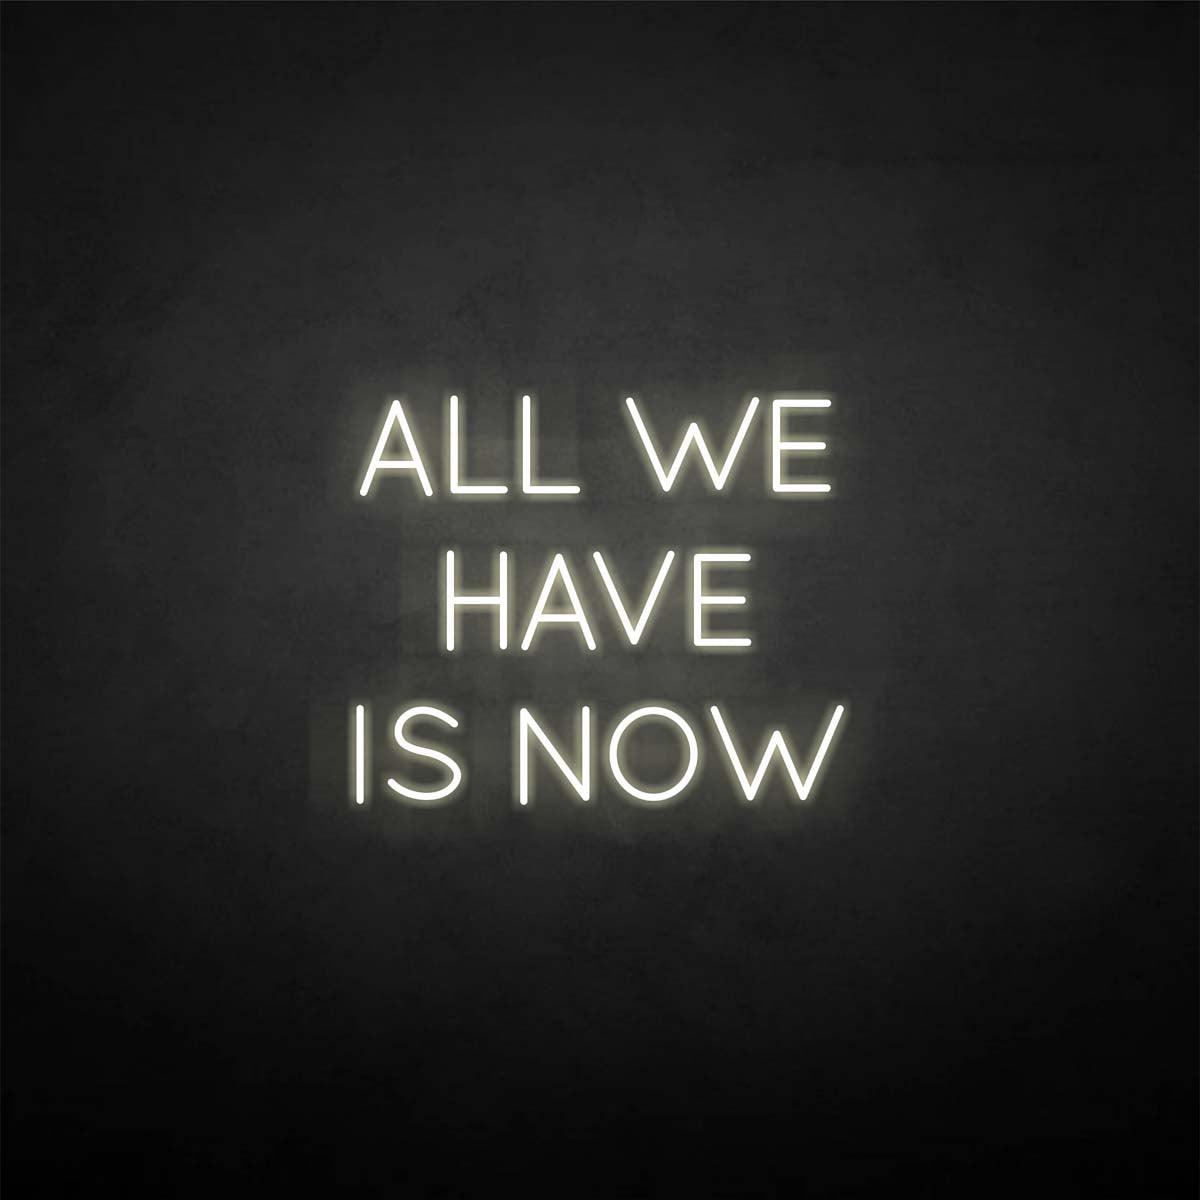 'All we have is now' neon sign